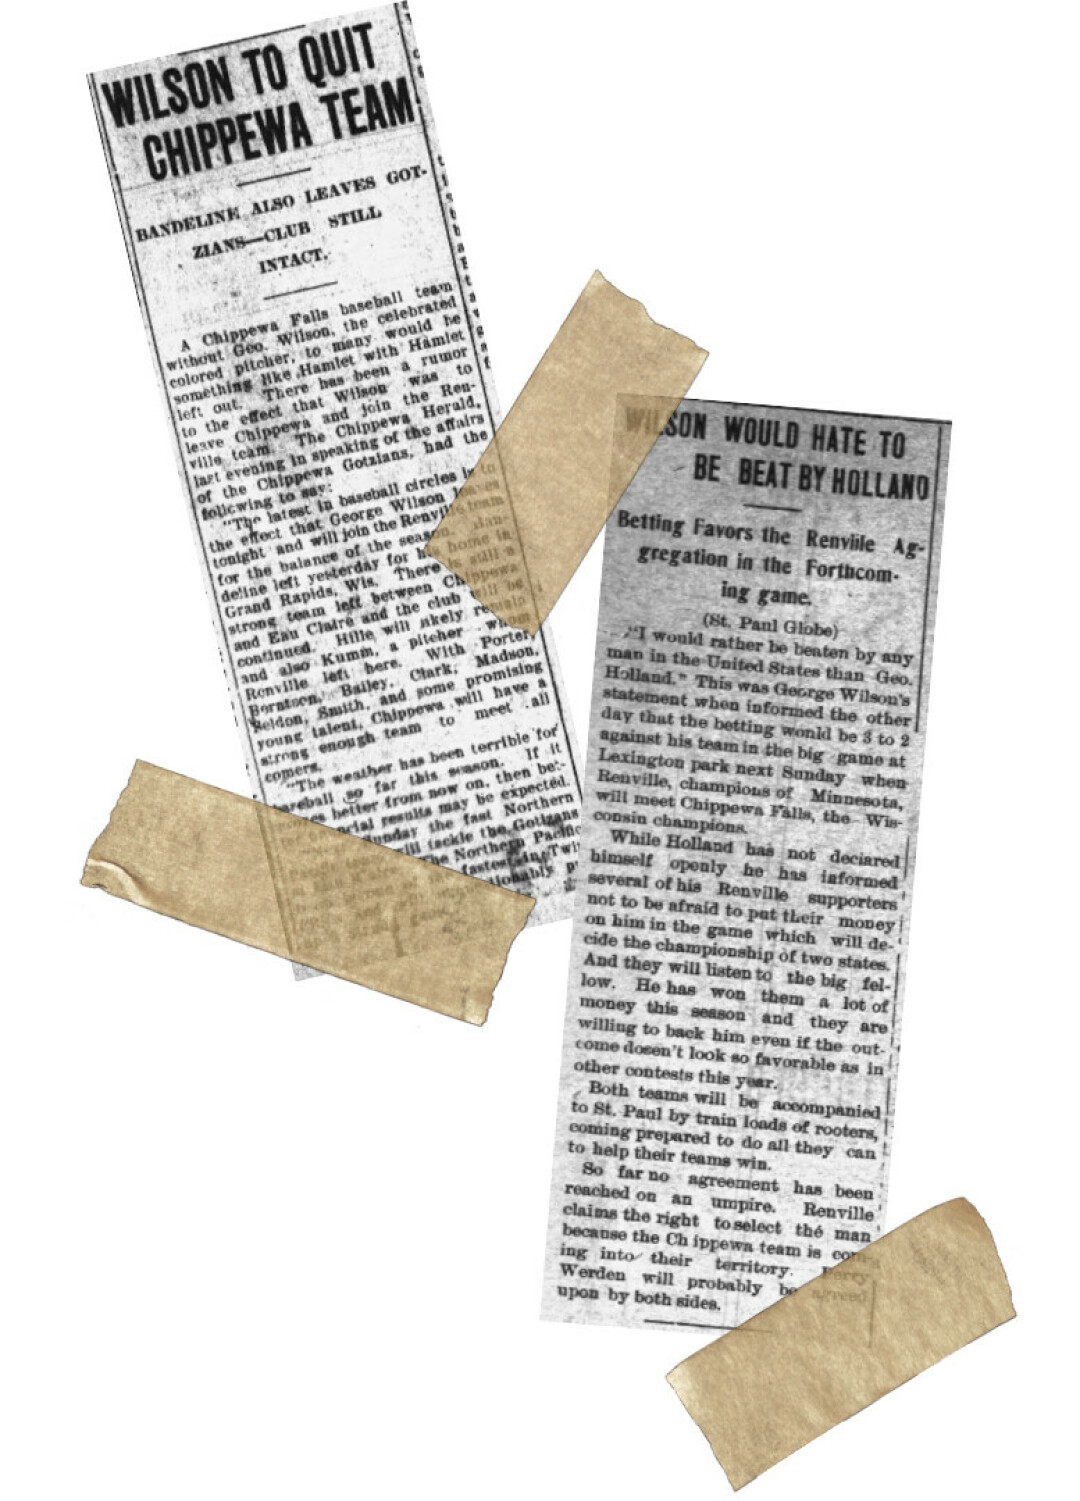 HEADLINE NEWS. Two of many newspaper articles published about George Wilson during his baseball career, these were printed circa 1904-05 in the Eau Claire Leader-Telegram.